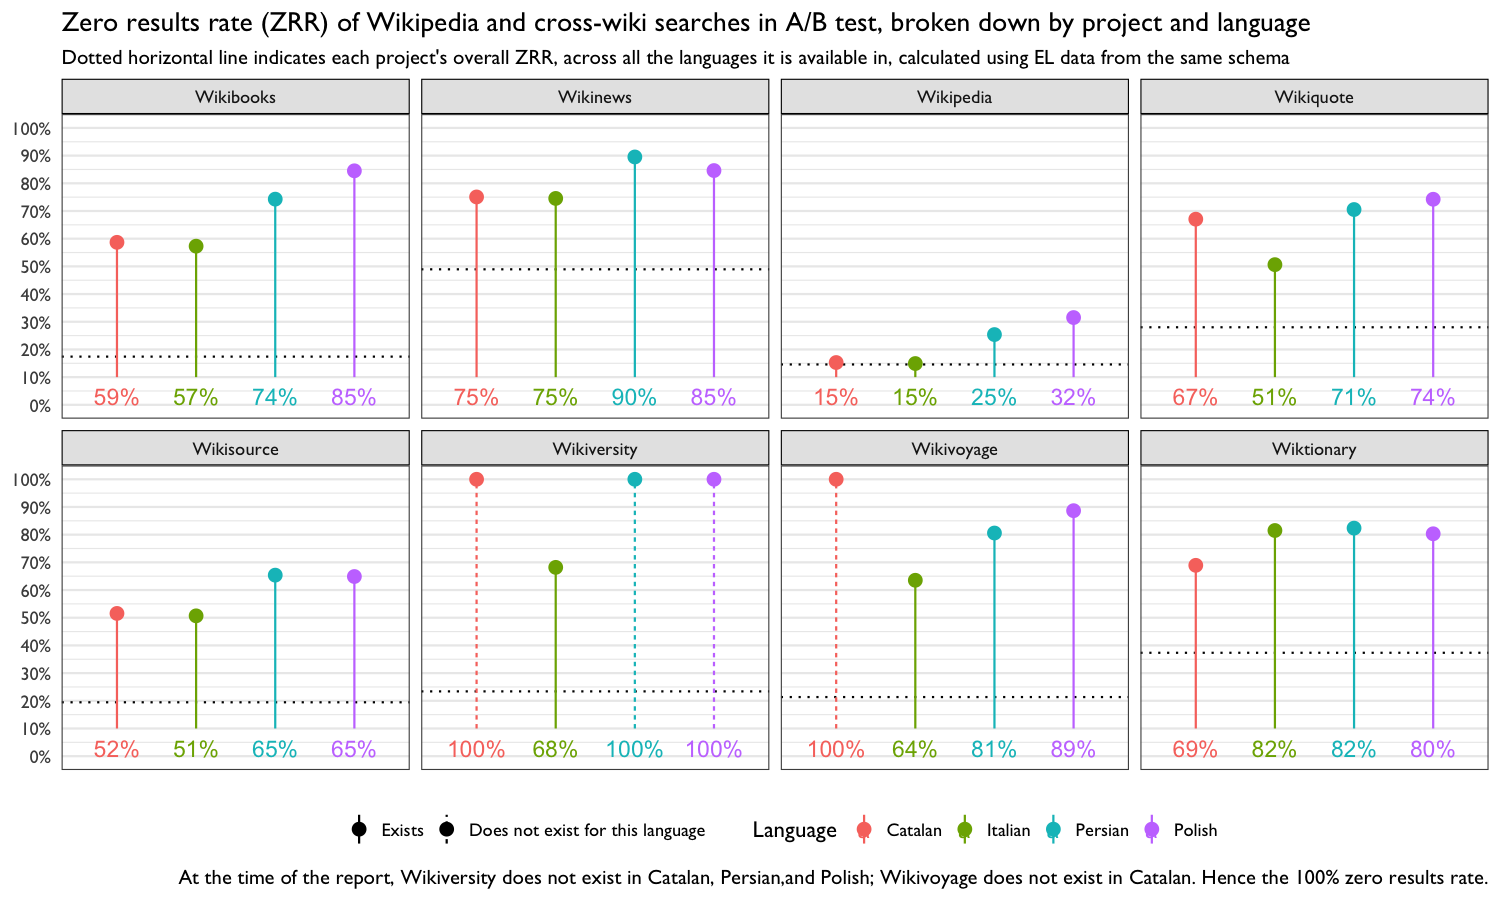 **Figure 4**: The proportion of searches that yielded zero results was the lowest for Wikipedia and Wikisource, with the other projects having very high zero result rates.